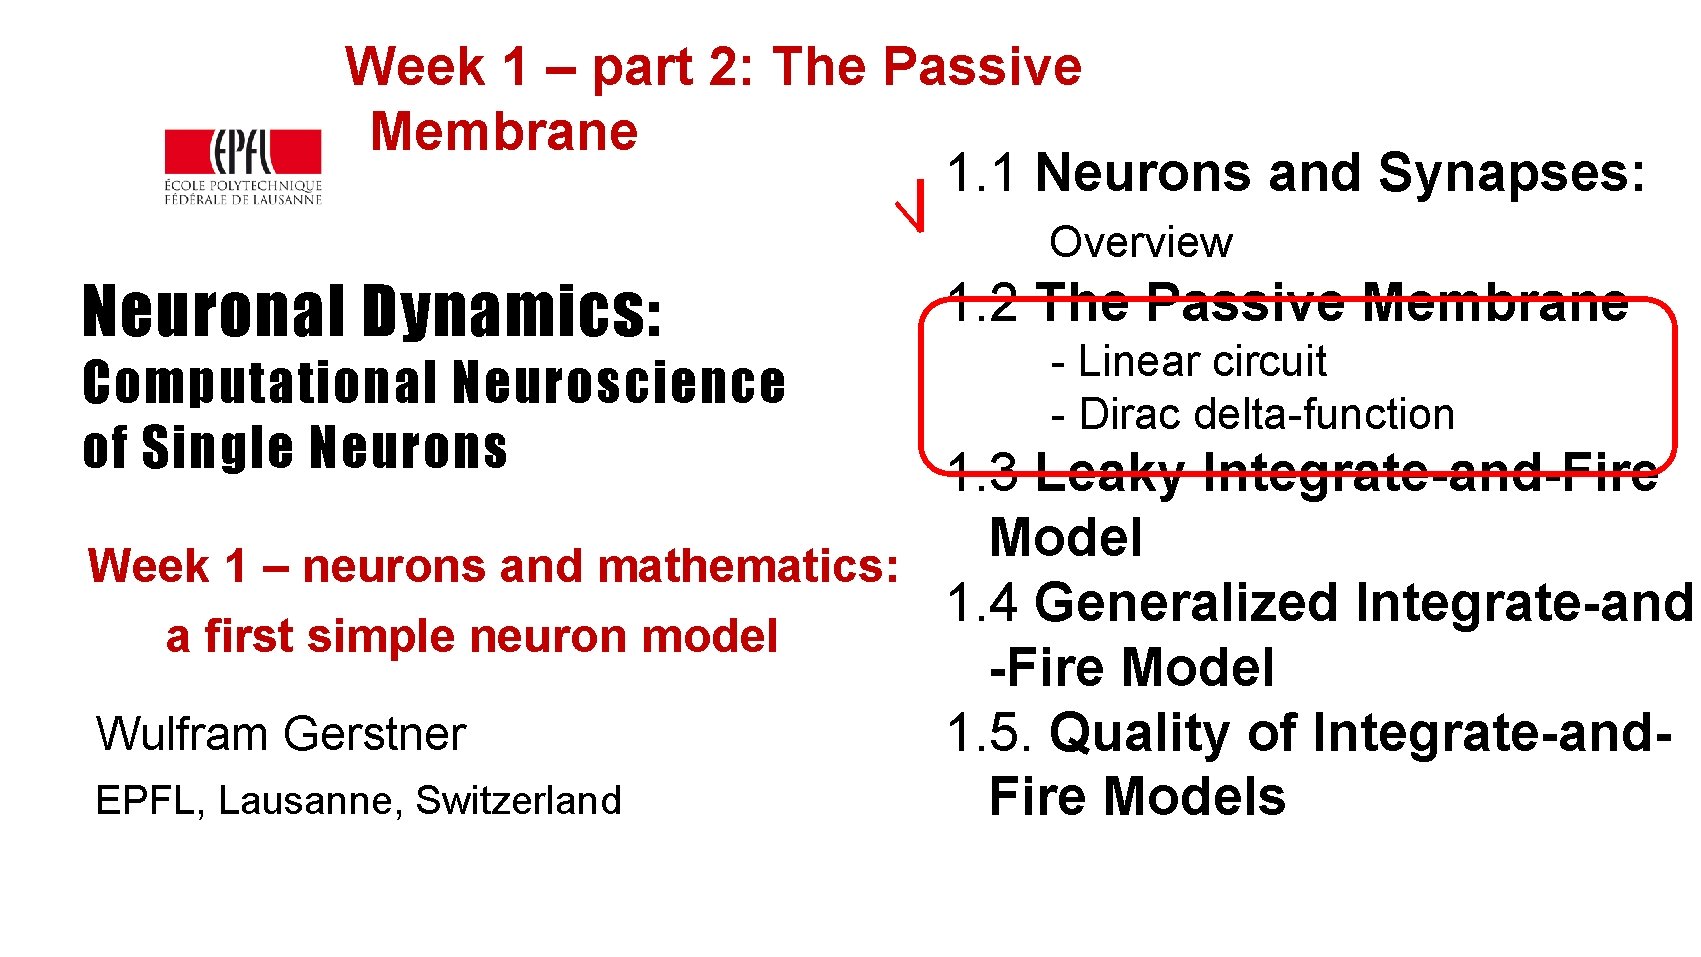 Week 1 – part 2: The Passive Membrane 1. 1 Neurons and Synapses: Overview